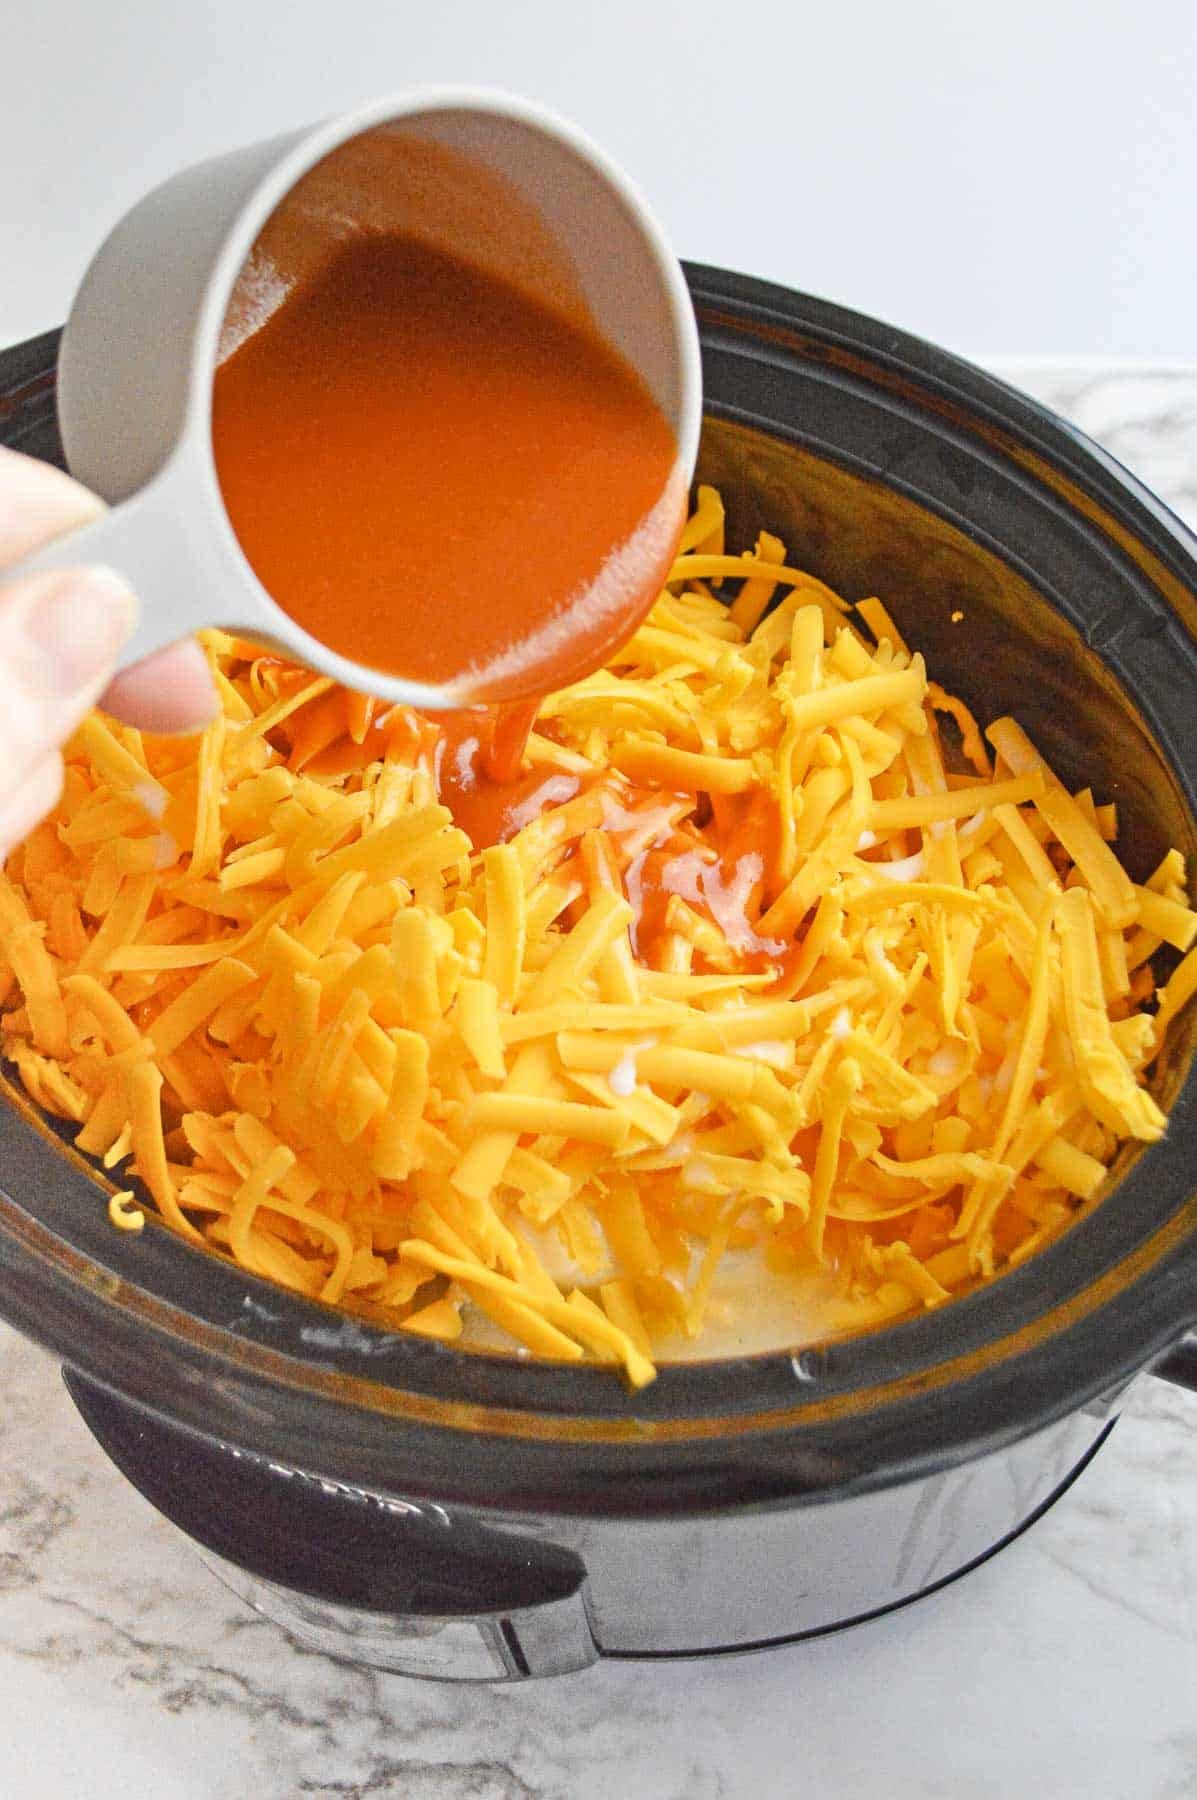 buffalo sauce being poured over shredded cheddar cheese in a crock pot.